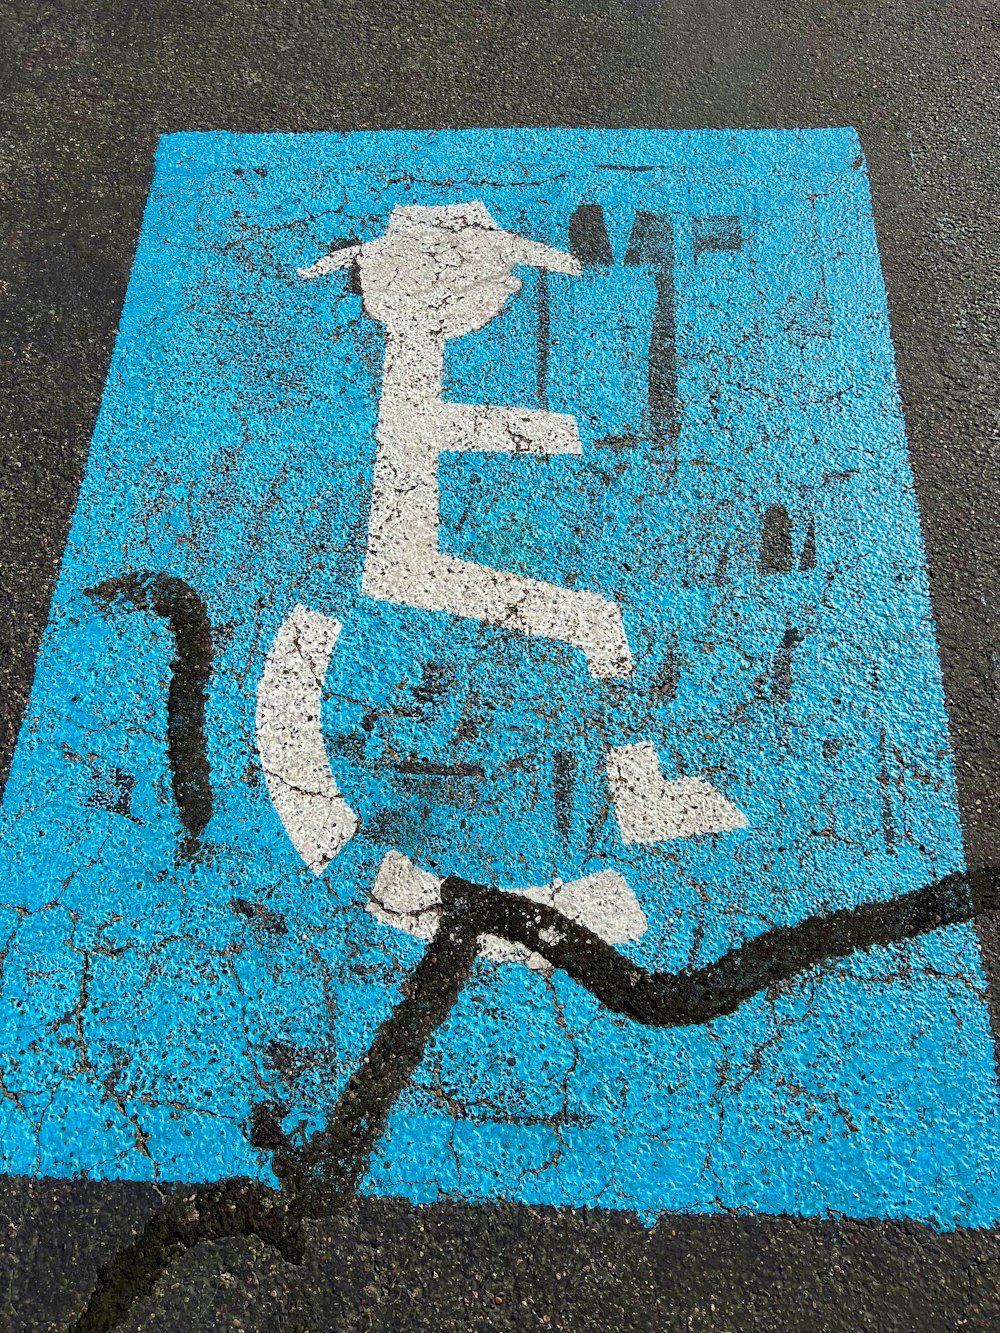 a picture of a street sign painted on the ground